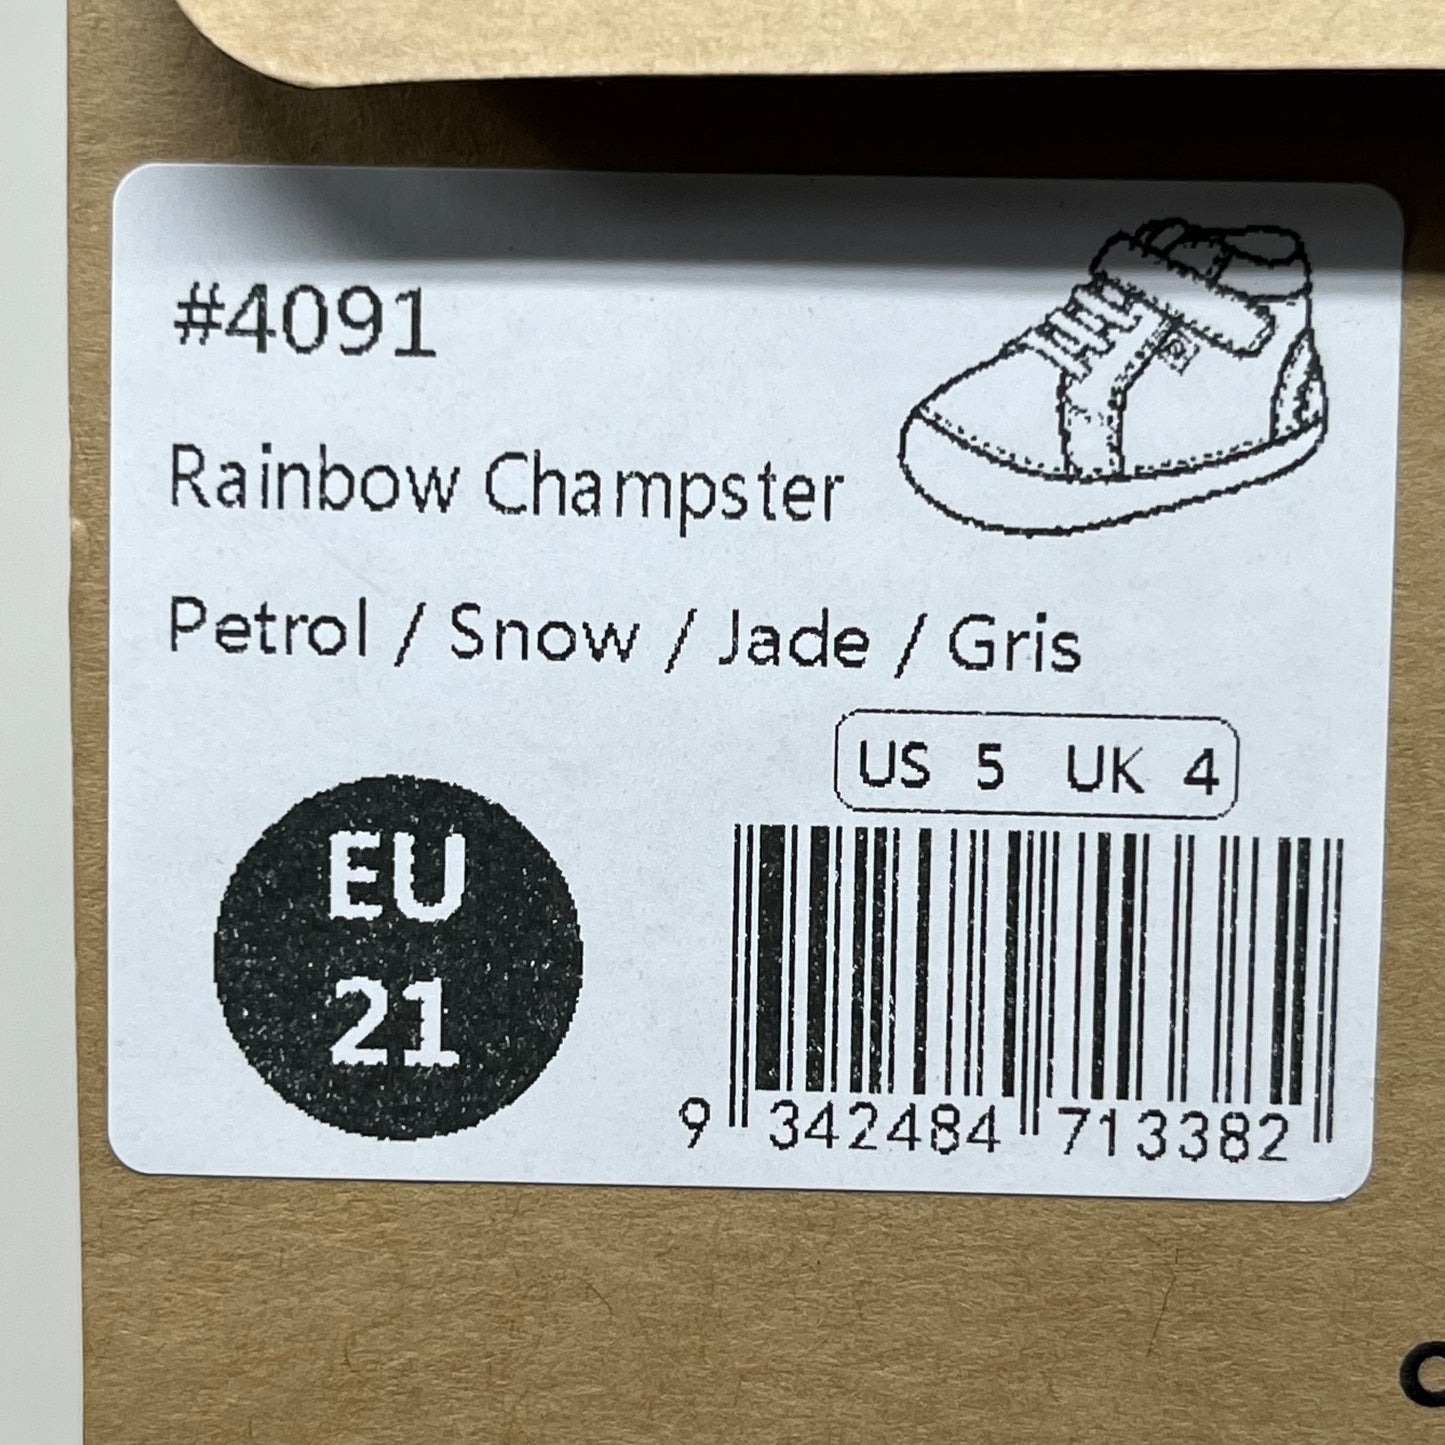 OLD SOLES Baby Rainbow Champster Leather Shoe Sz 21 US 5 Petrol/Snow/Jade/Gris #4091